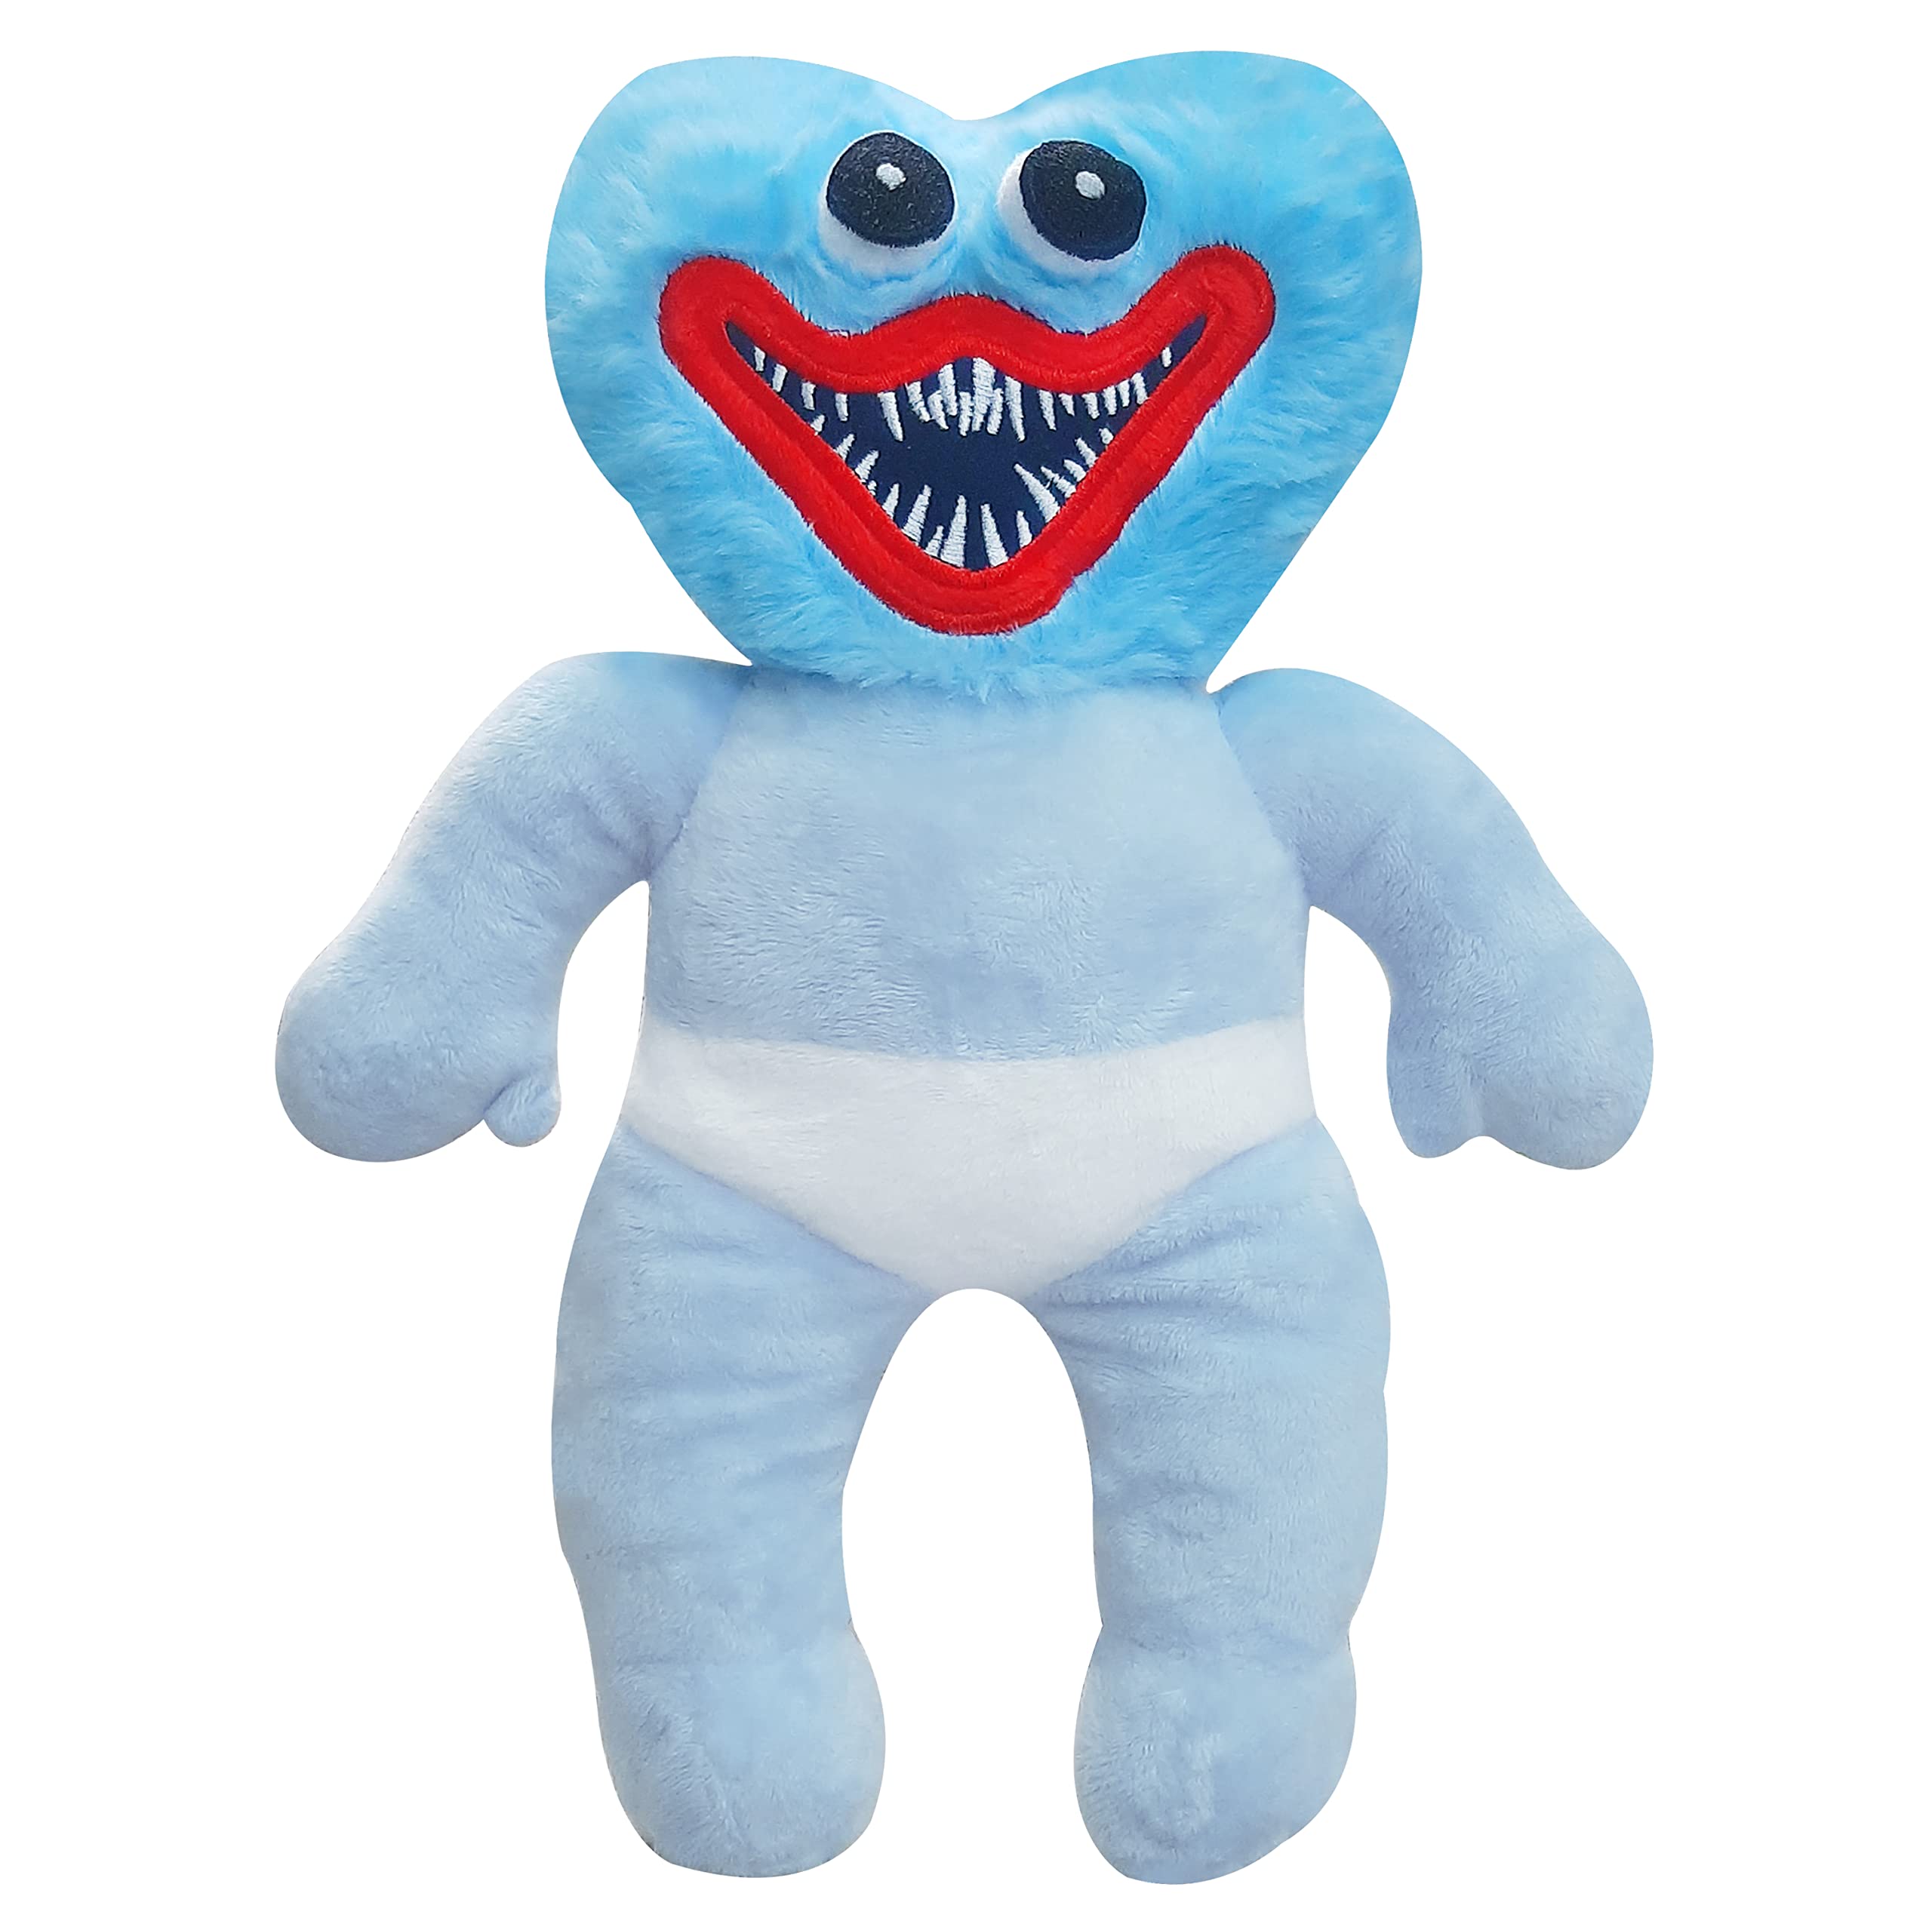 Baby Huggy Plush, Kissy Missy Plushie, Soft Toys, Mommy Long Legs  Stuffed Toys Are Gaming Gift For Boys and Girls, Monster Plushies are Kids  Toys